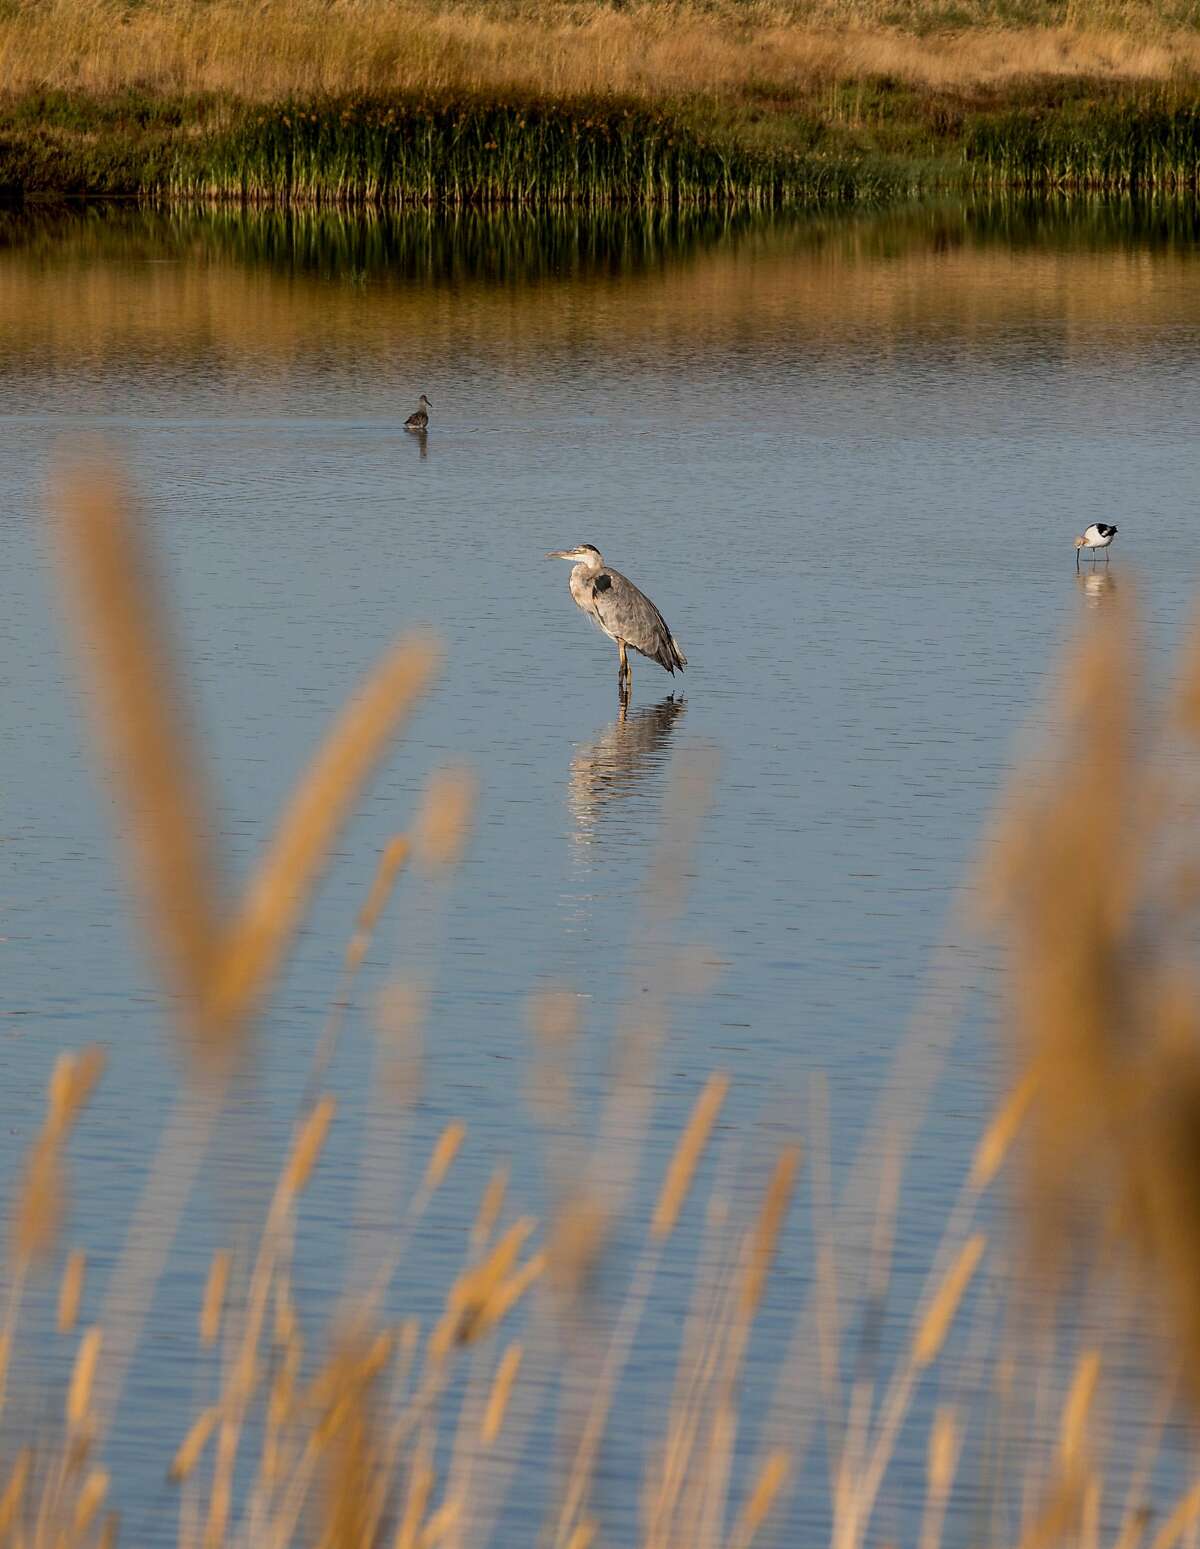 A bird wades in the waters of the wetlands near Cullinan Ranch along Highway 37 in Vallejo, Calif. Friday, August 16, 2019.